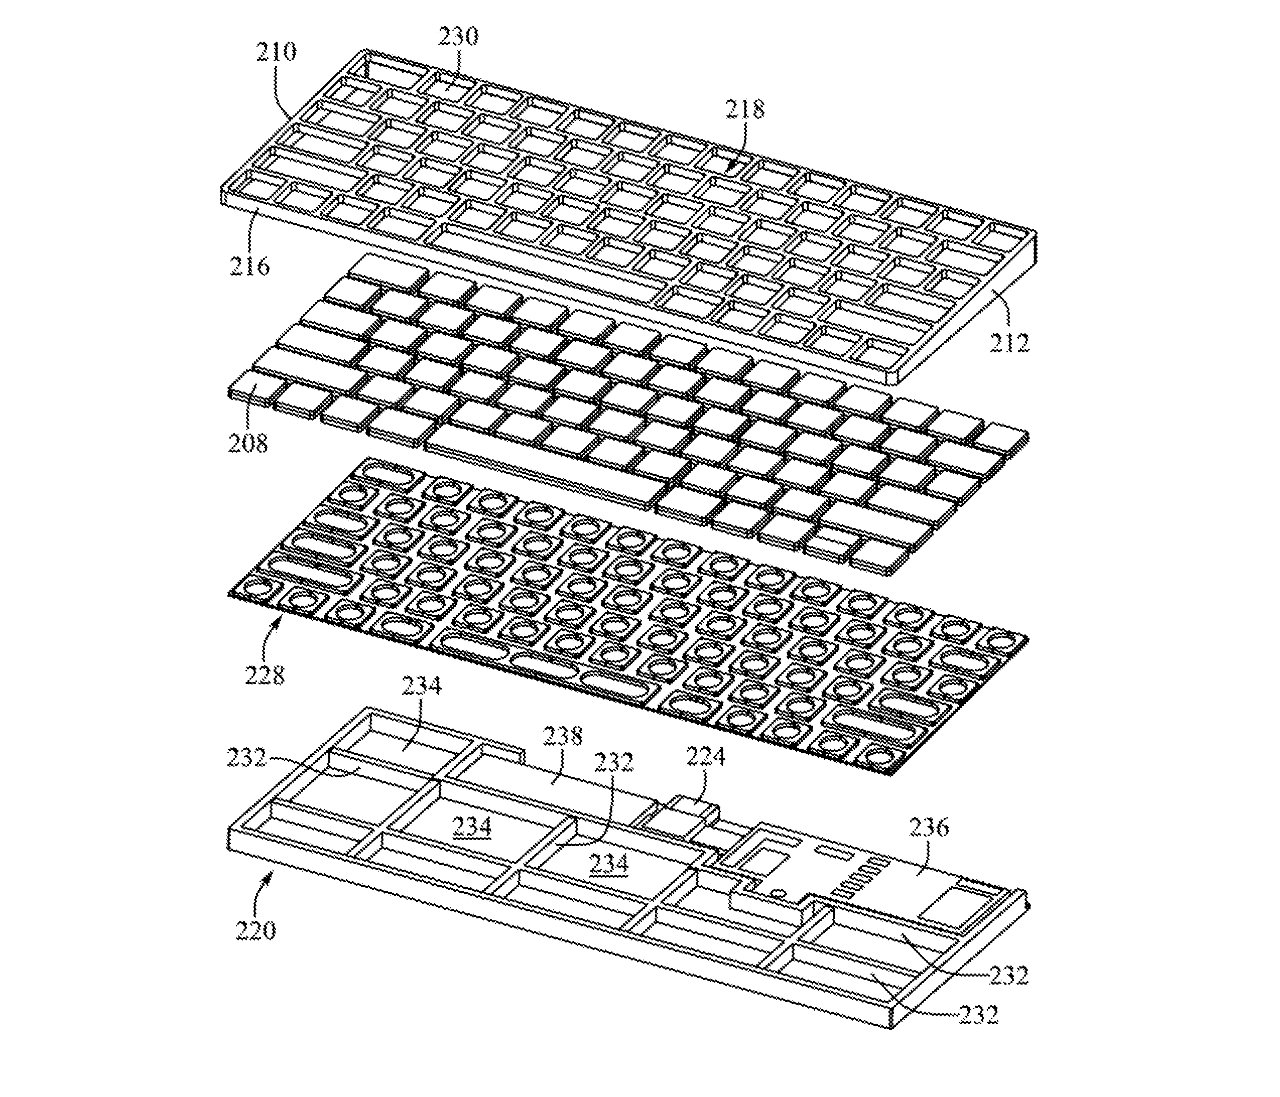 Detail from the patent application showing the whole stack from keys at the top to computer components at the bottom